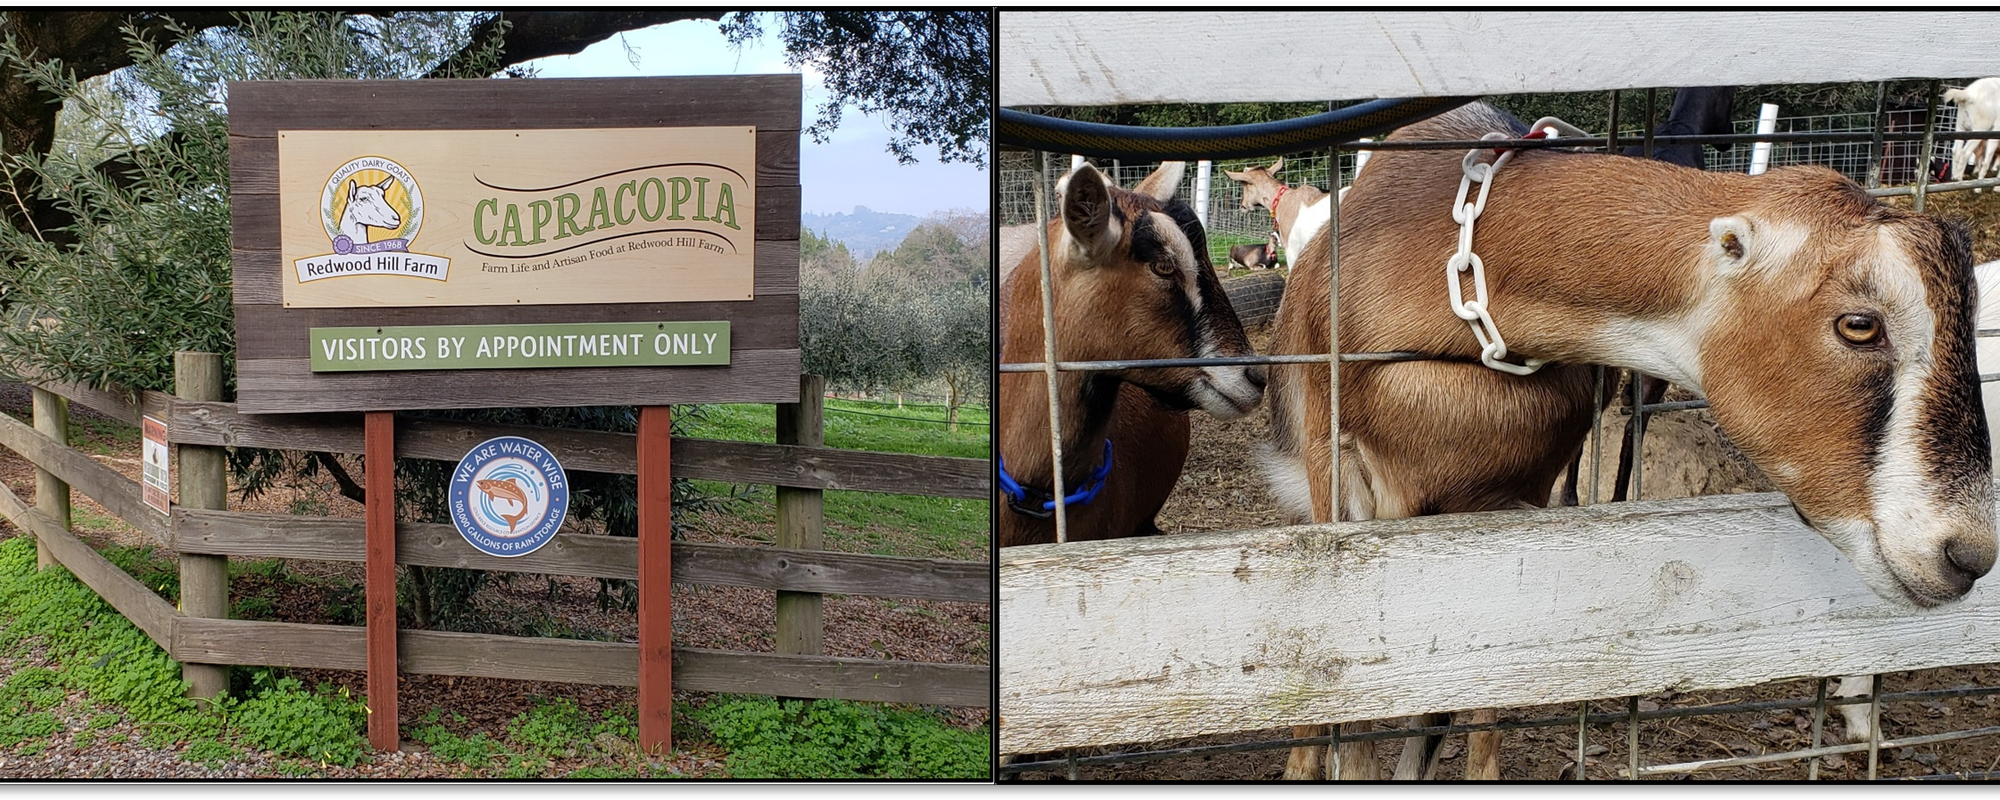 R2R Travelogue 10: Redwood Hill Farms and Sonoma County, California